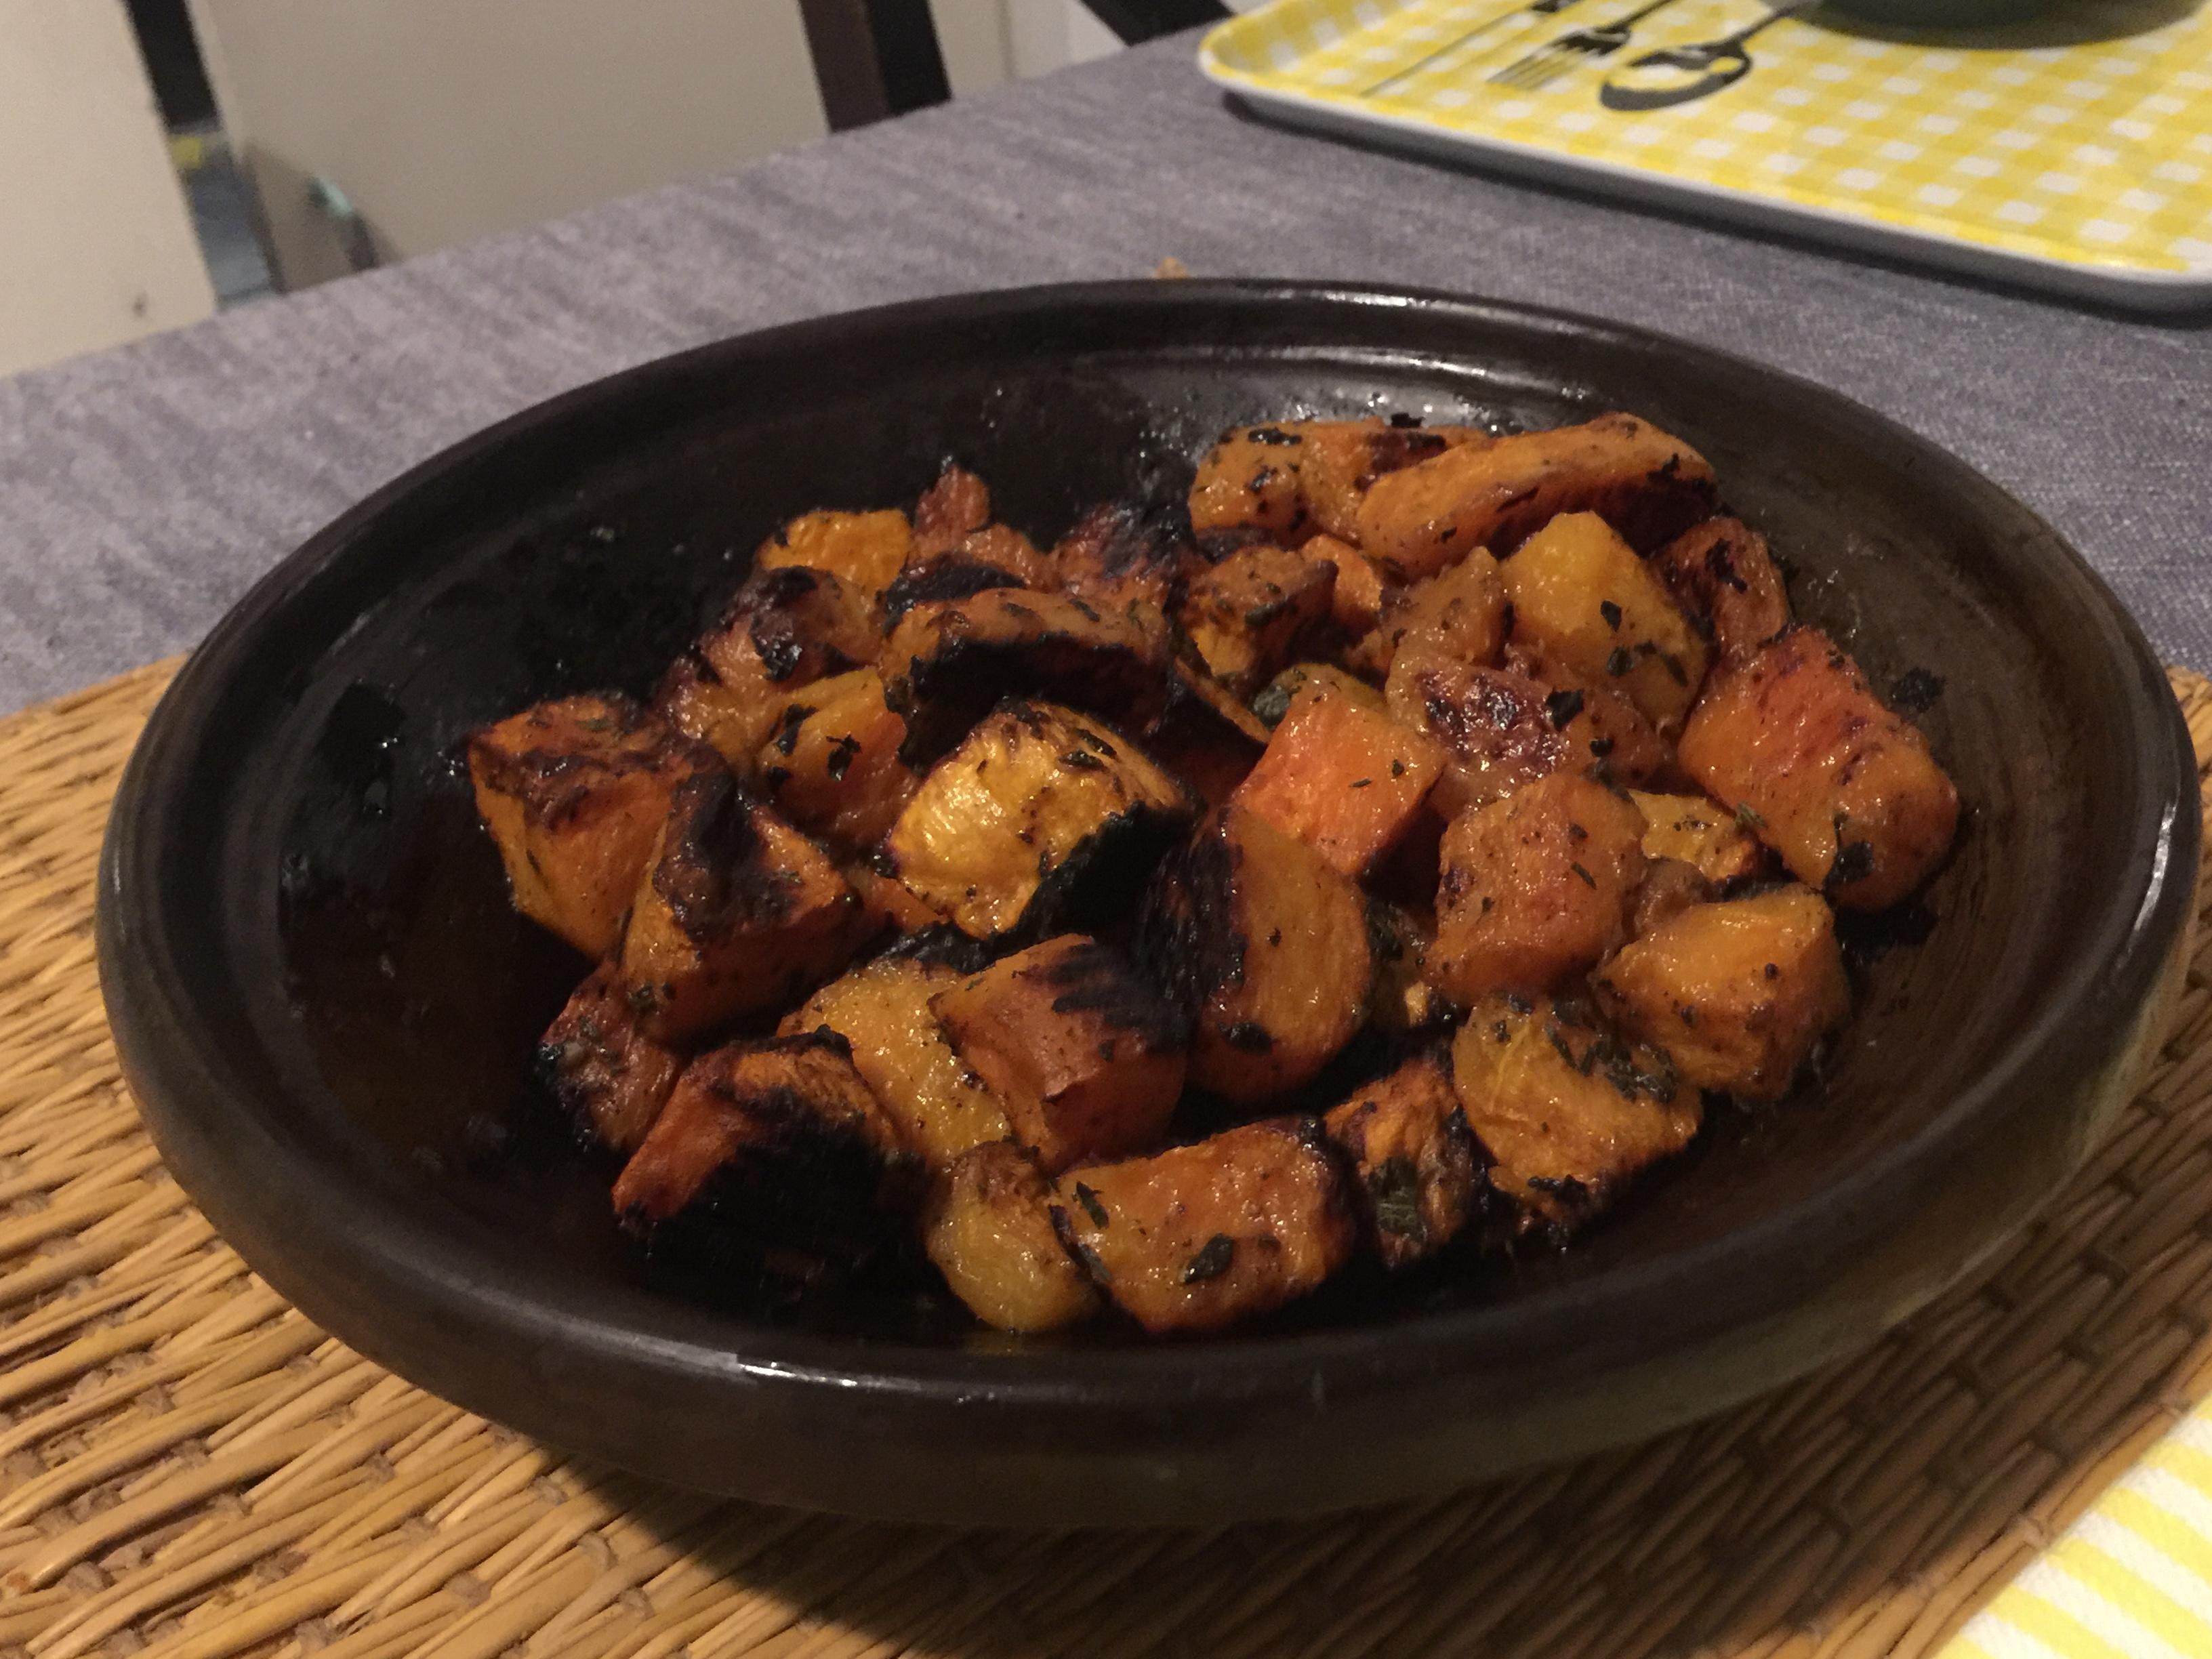 Roasted squash for a simple, healthy dinner